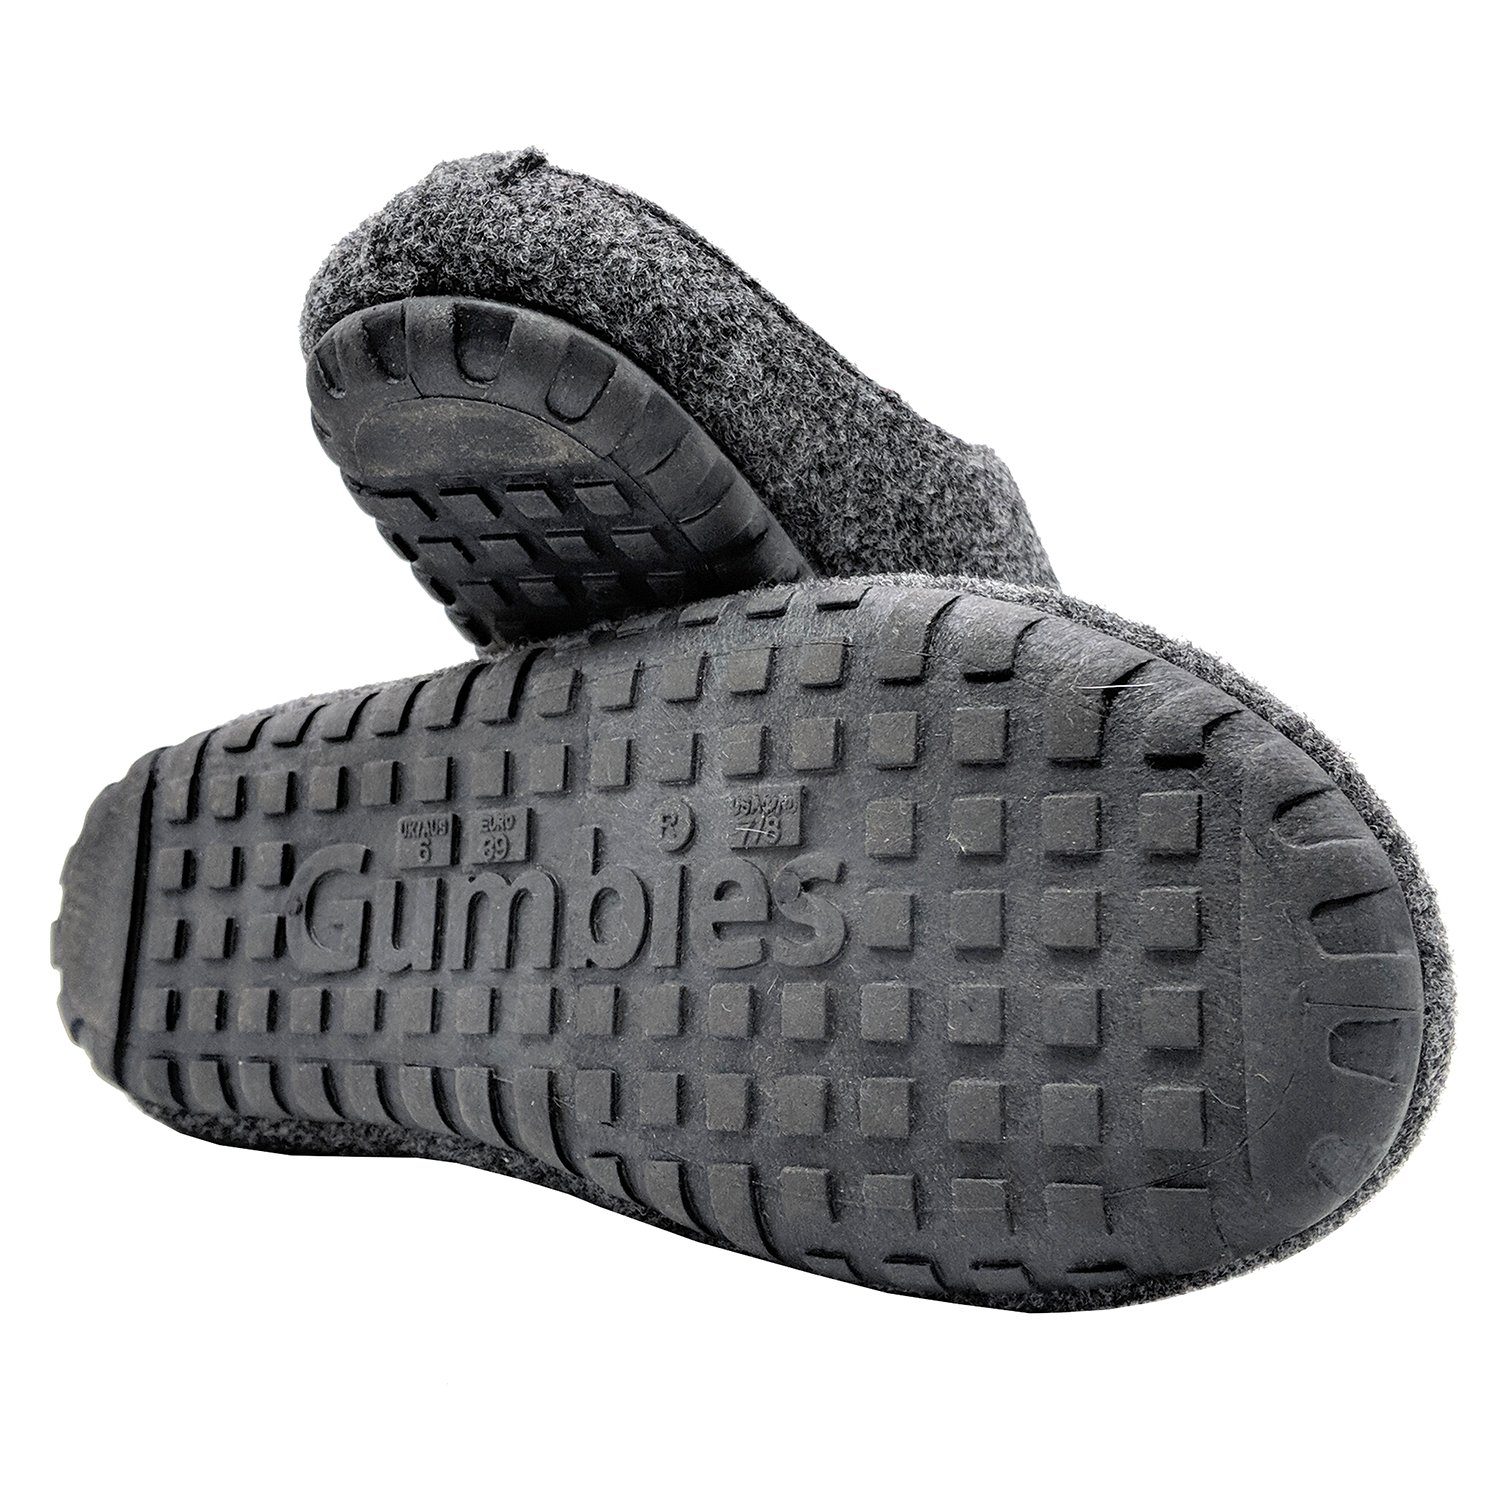 Materialien Red Slipper Charcoal Hausschuh Outback in Gumbies »in farbenfrohen Designs« aus recycelten charcoal-Red